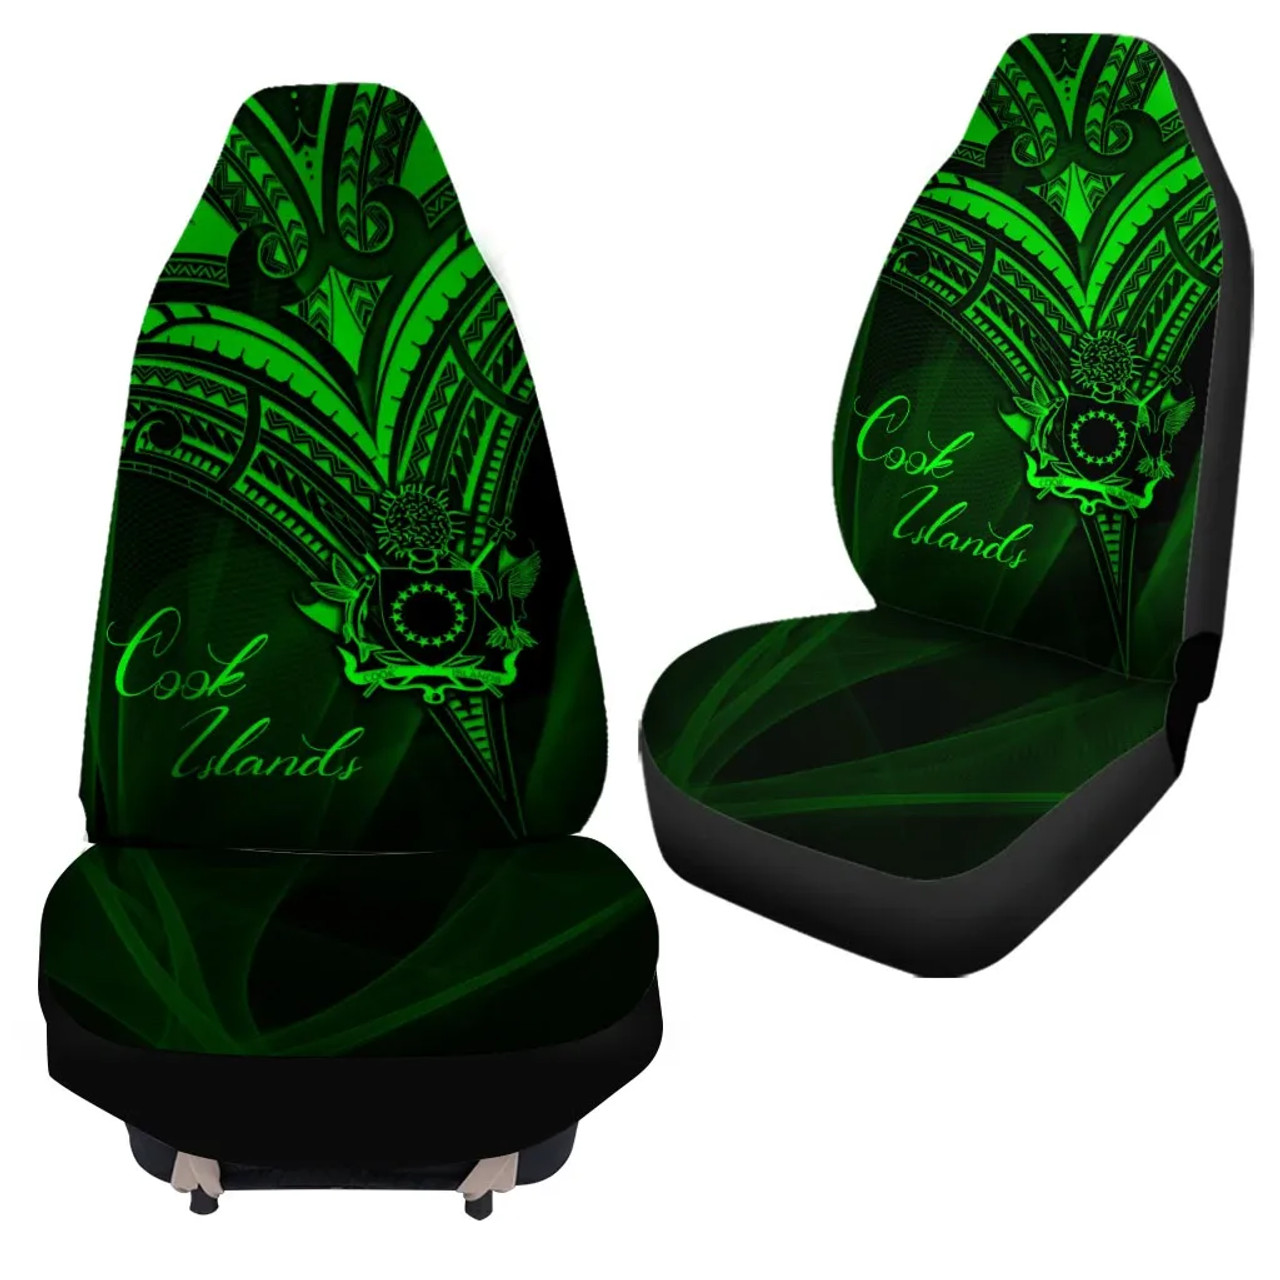 Cook Islands Car Seat Cover - Green Color Cross Style